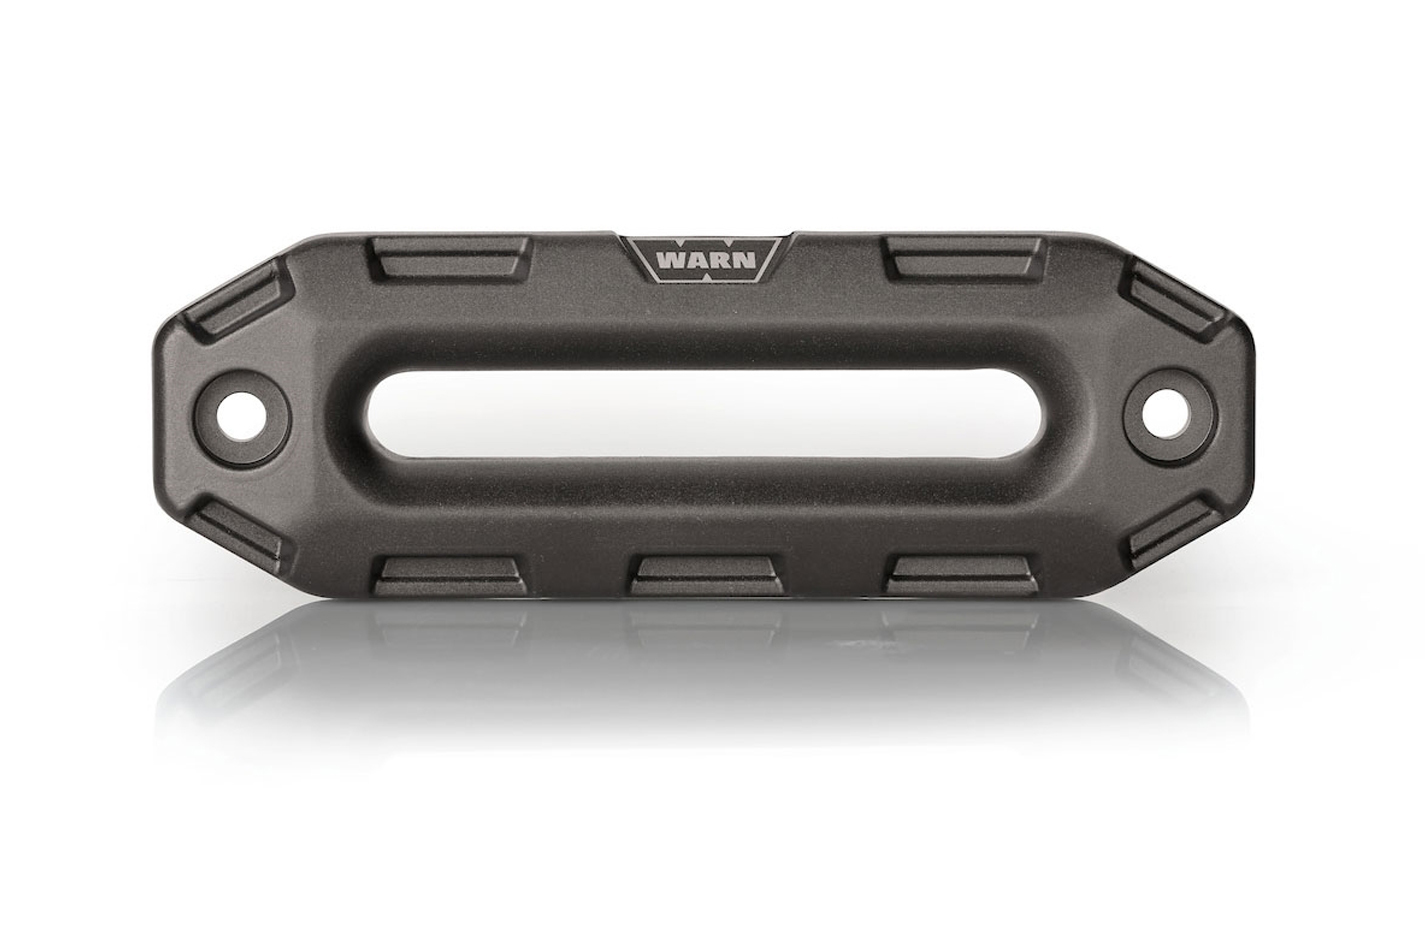 Warn 100650 Winch Fairlead, Epic Series, Hawse, 1 in Thick, Aluminum, Gray Anodized, Each